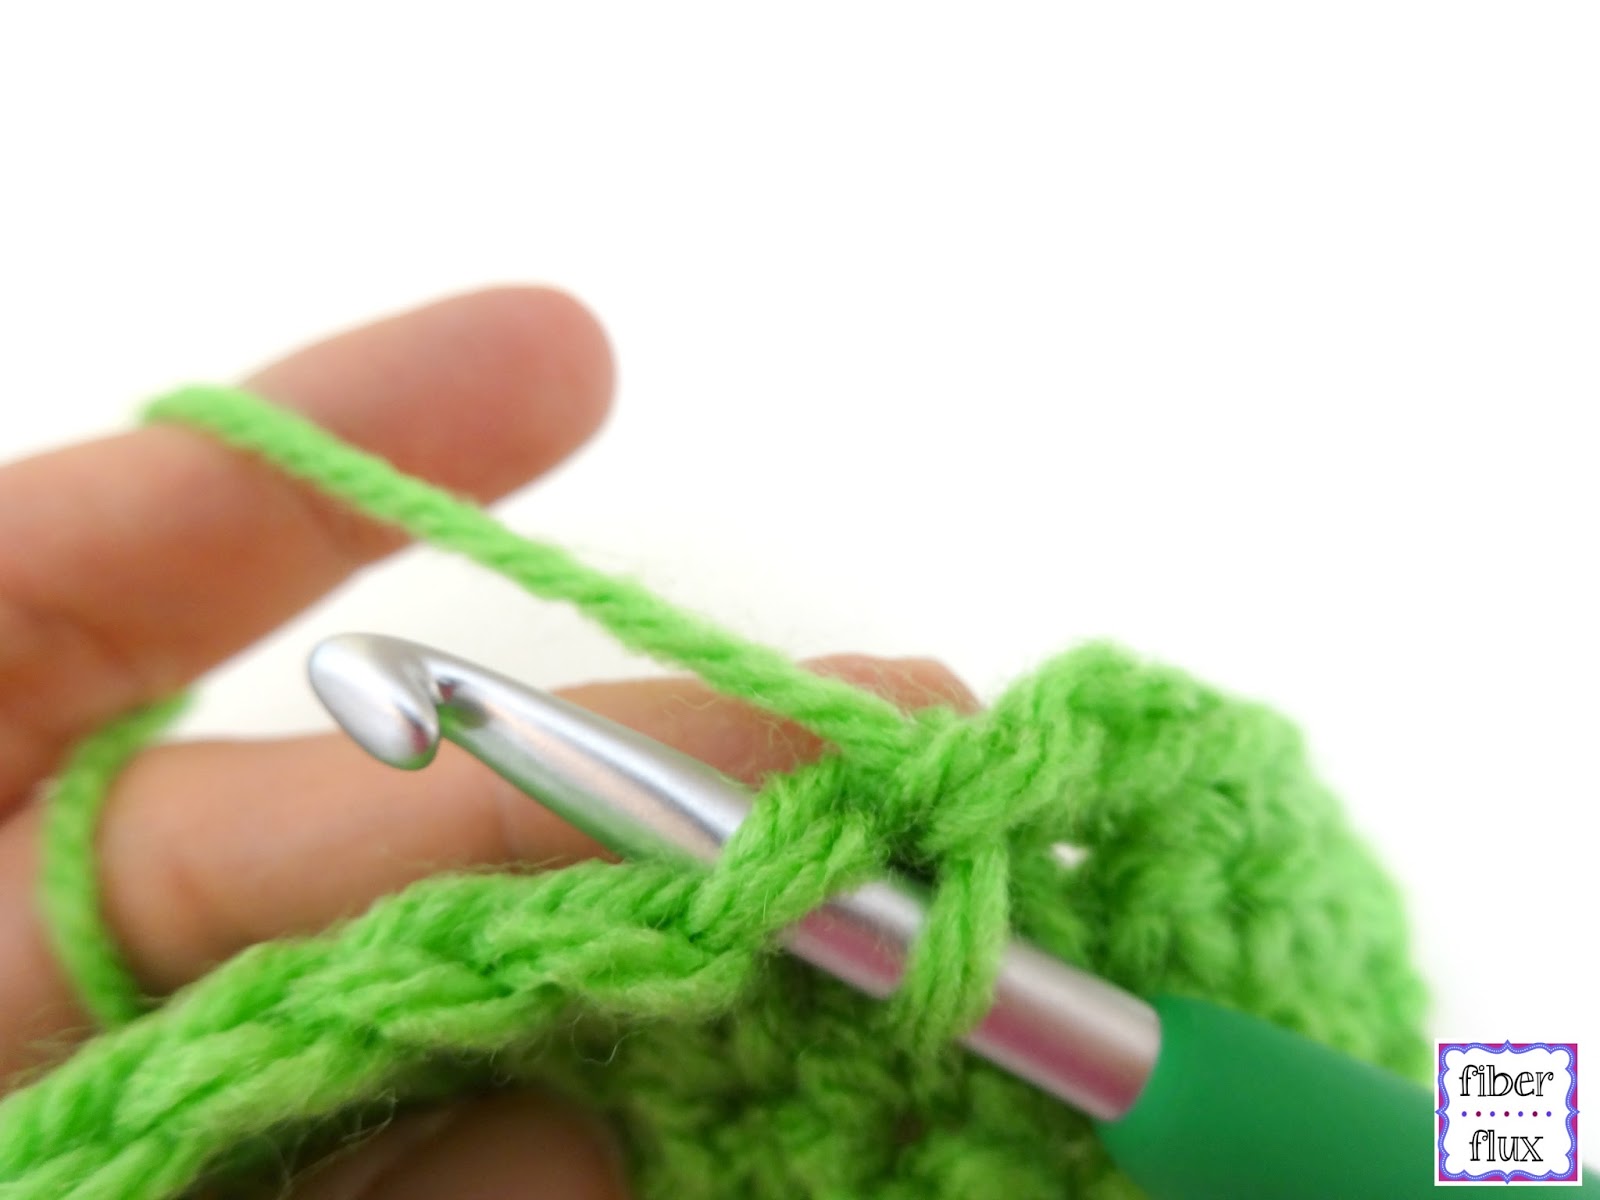 Fiber Flux: How to Single Crochet Two Together or sc2tog (Photo + Video